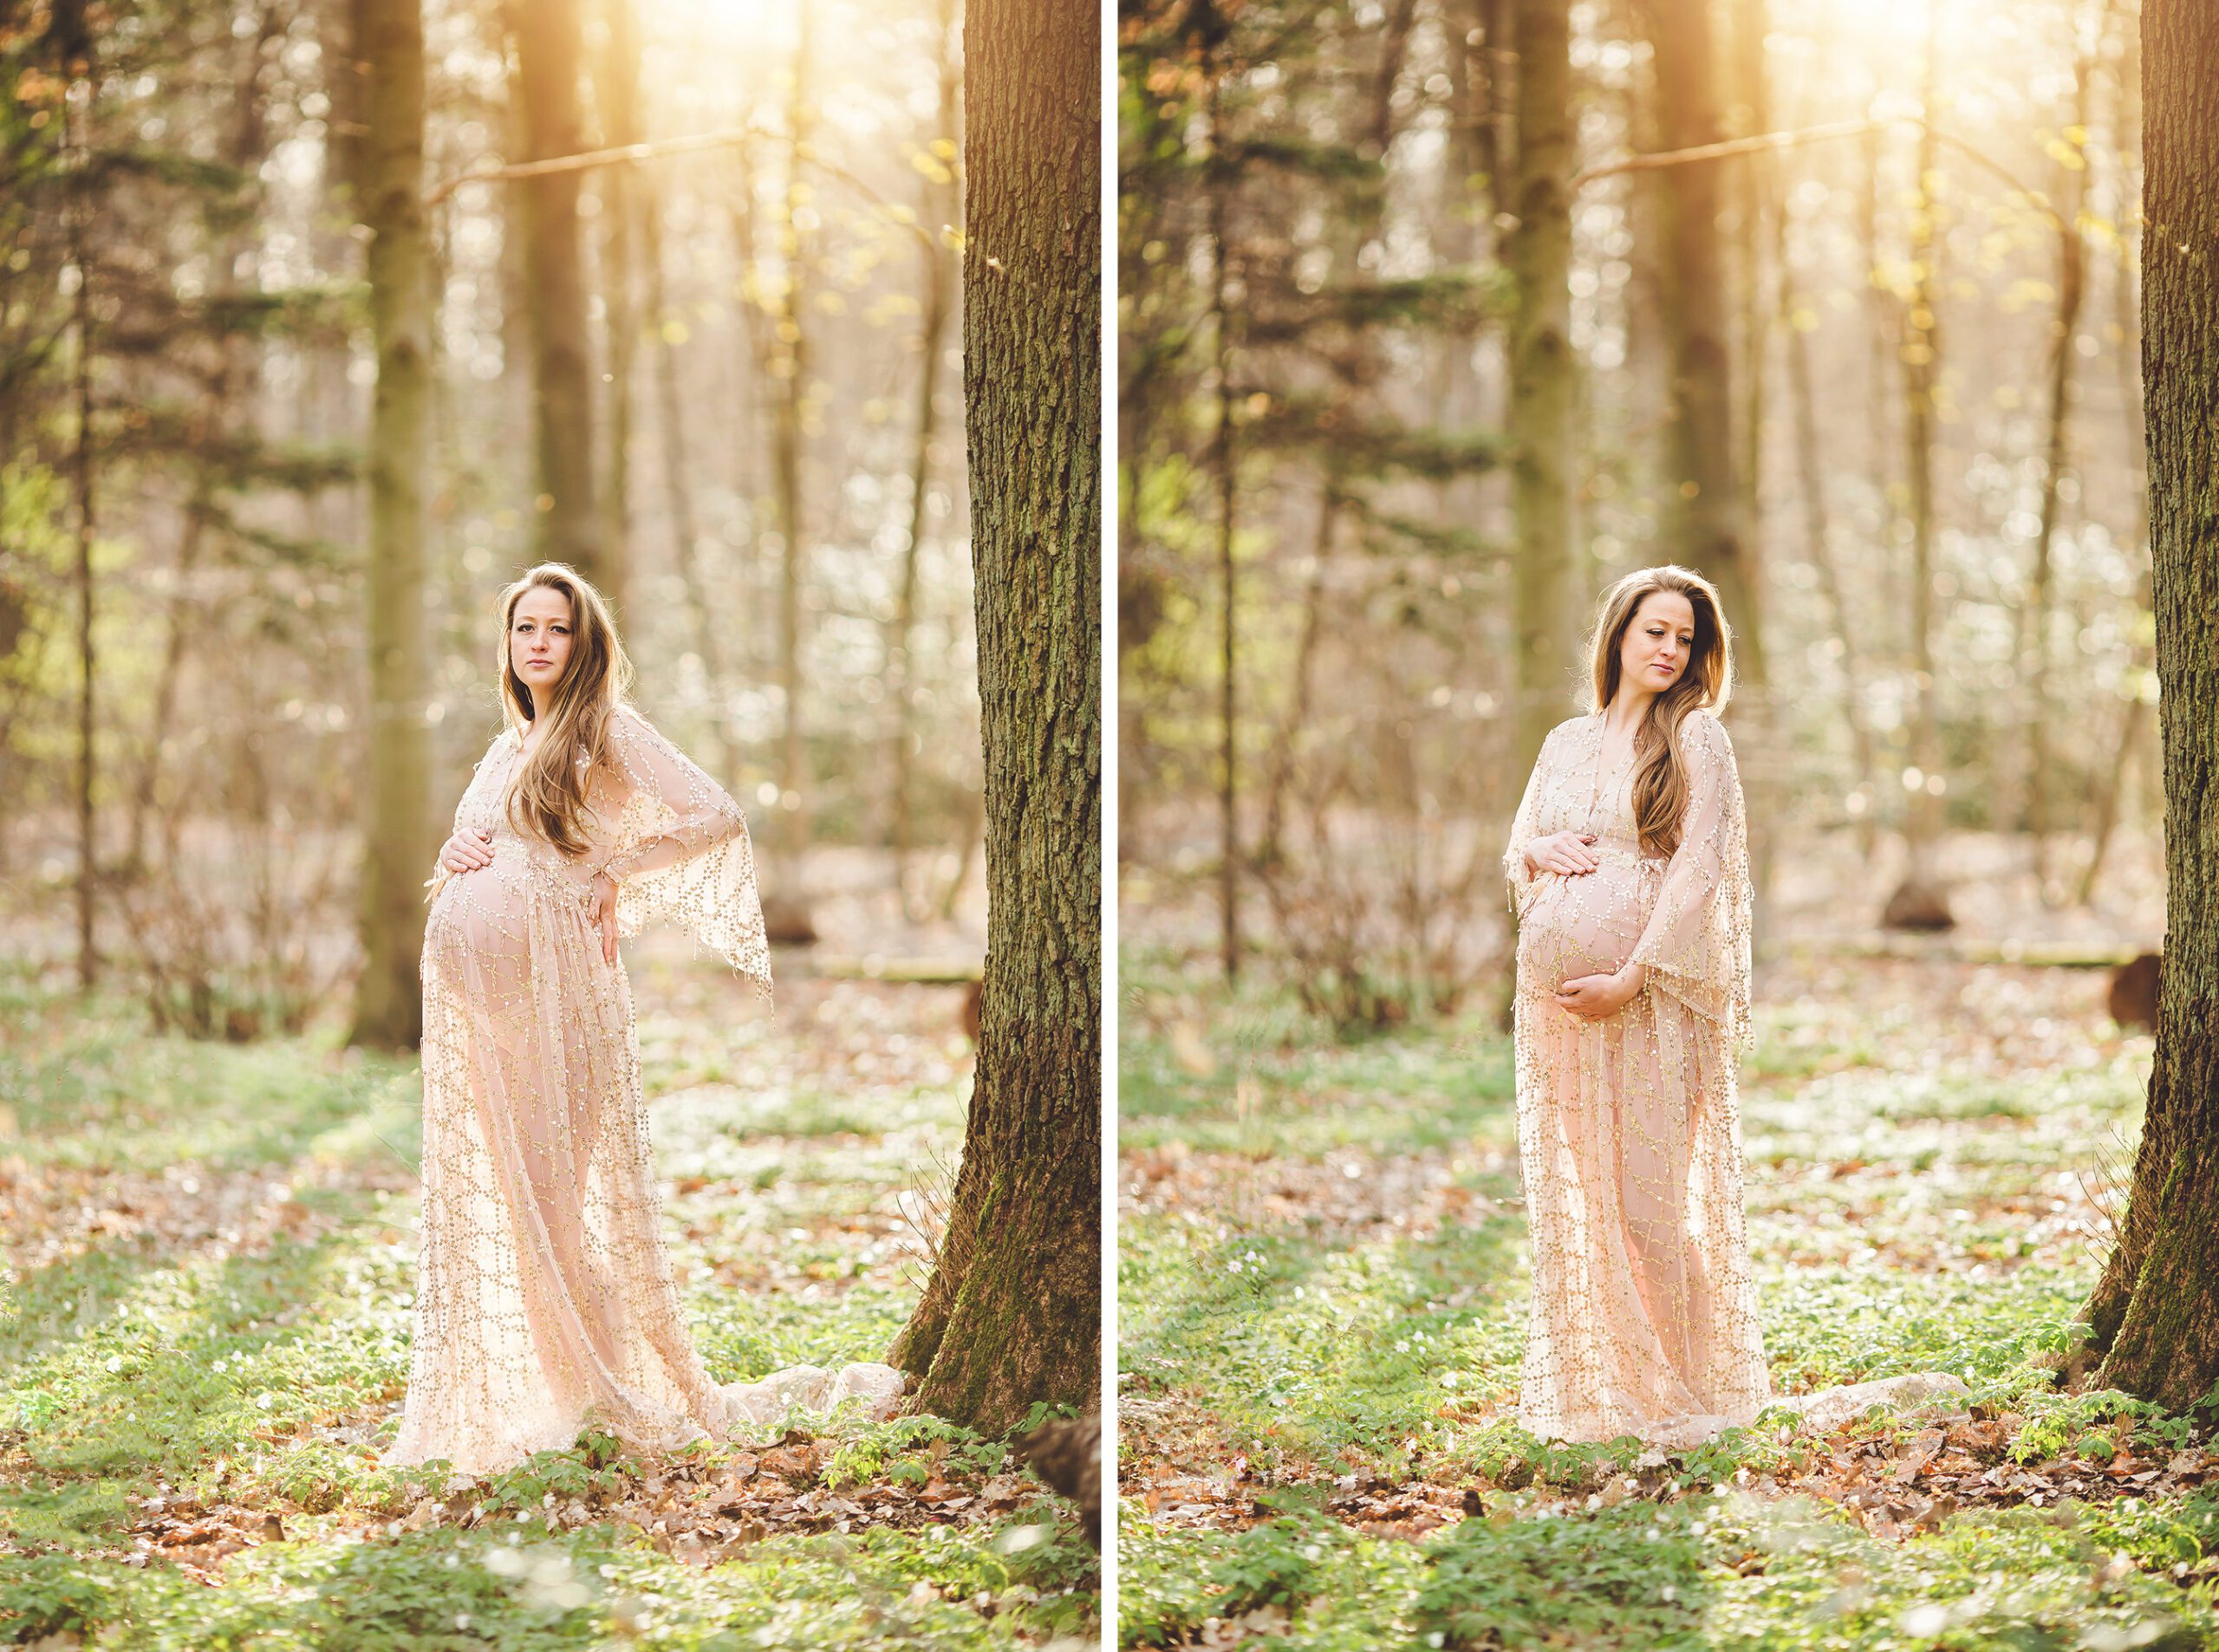 Spring greens and sunlight for this spring maternity session